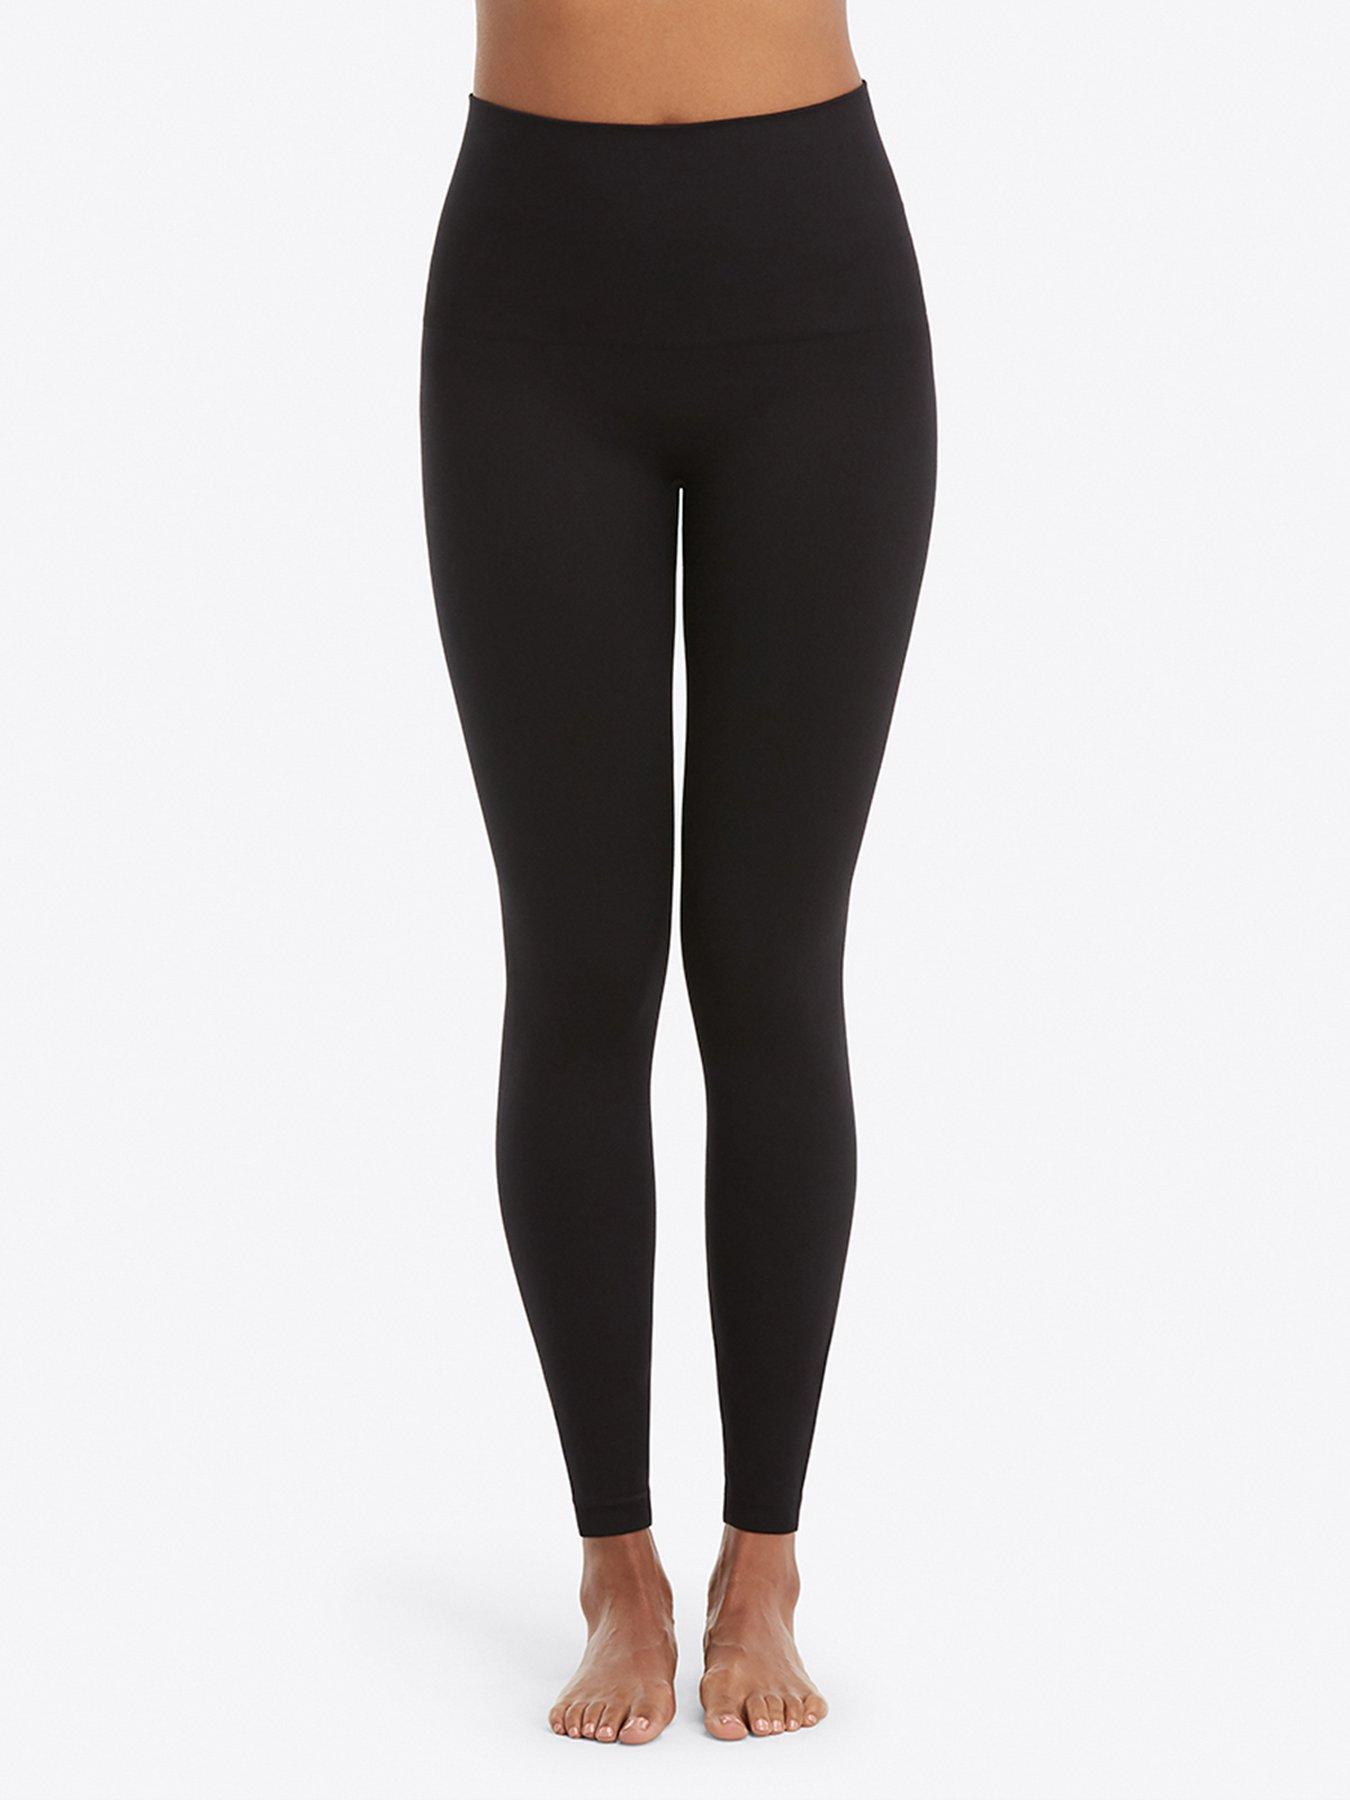 ASSETS by SPANX Women's Original Shaping Tights - Black 5